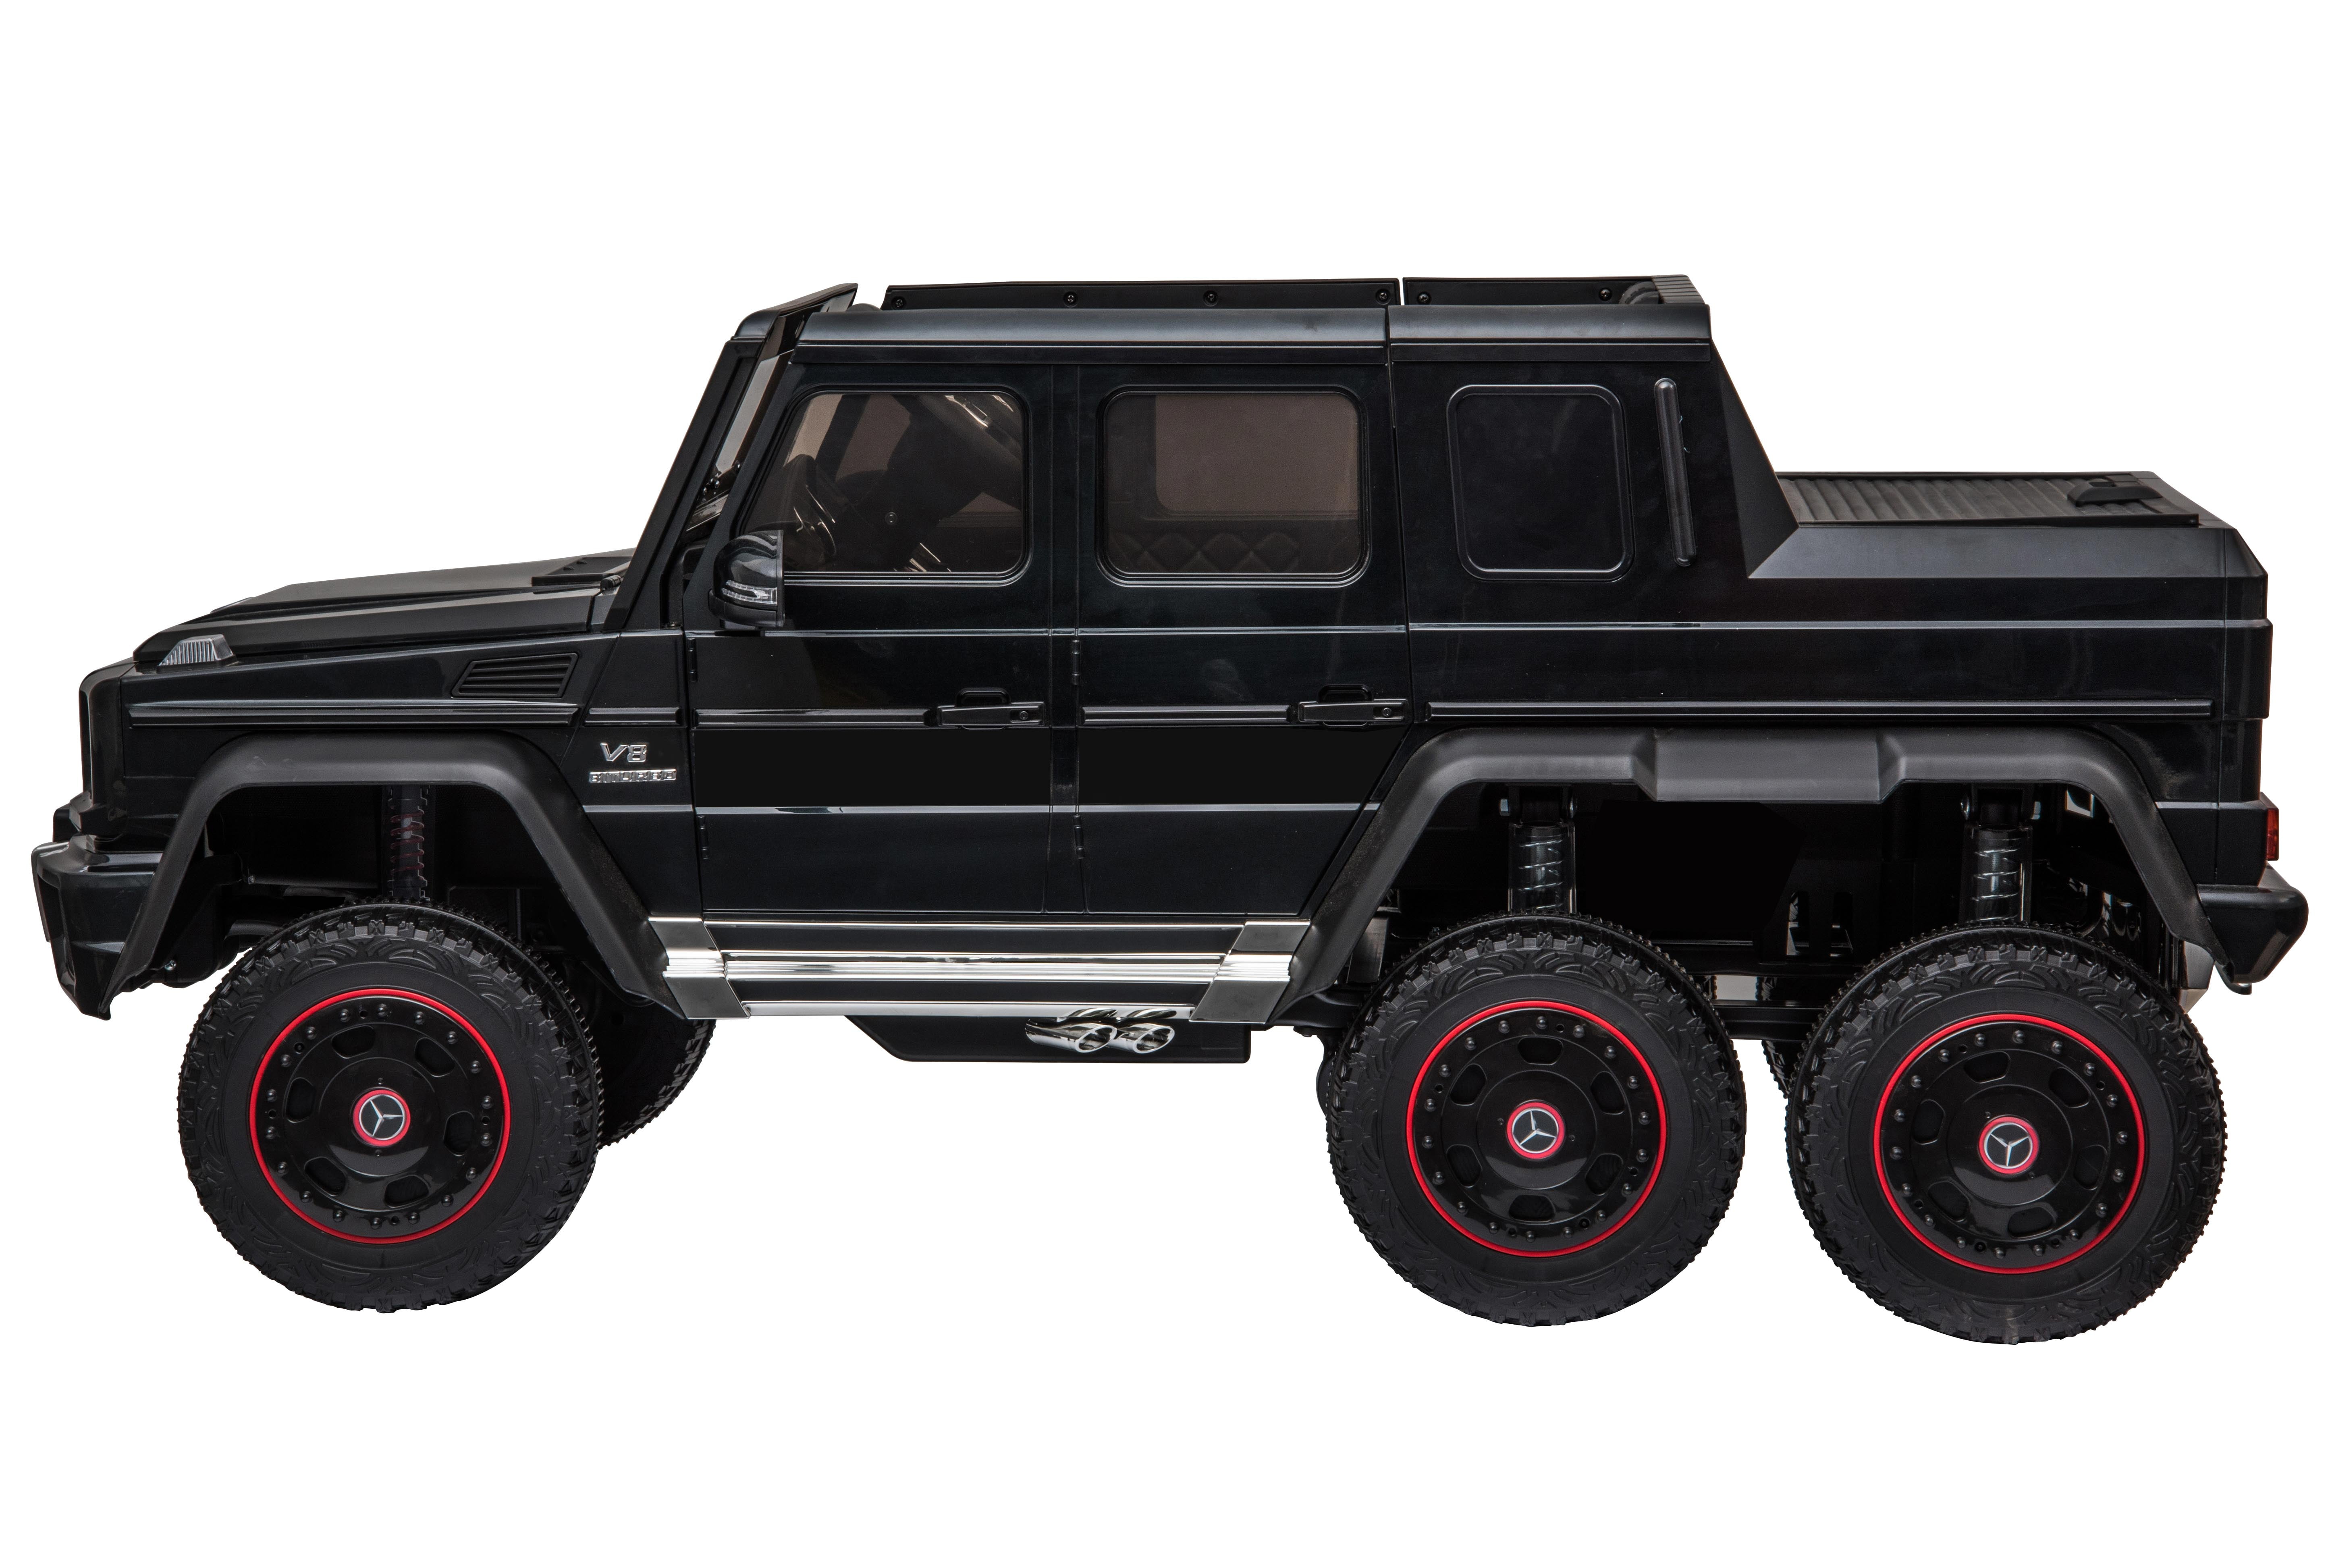 Benz Zemto 6/6 Price / Benz Zemto 6/6 Price - Mercedes Benz G63 Amg 6x6 Listed ... - Pricing and which one to buy.